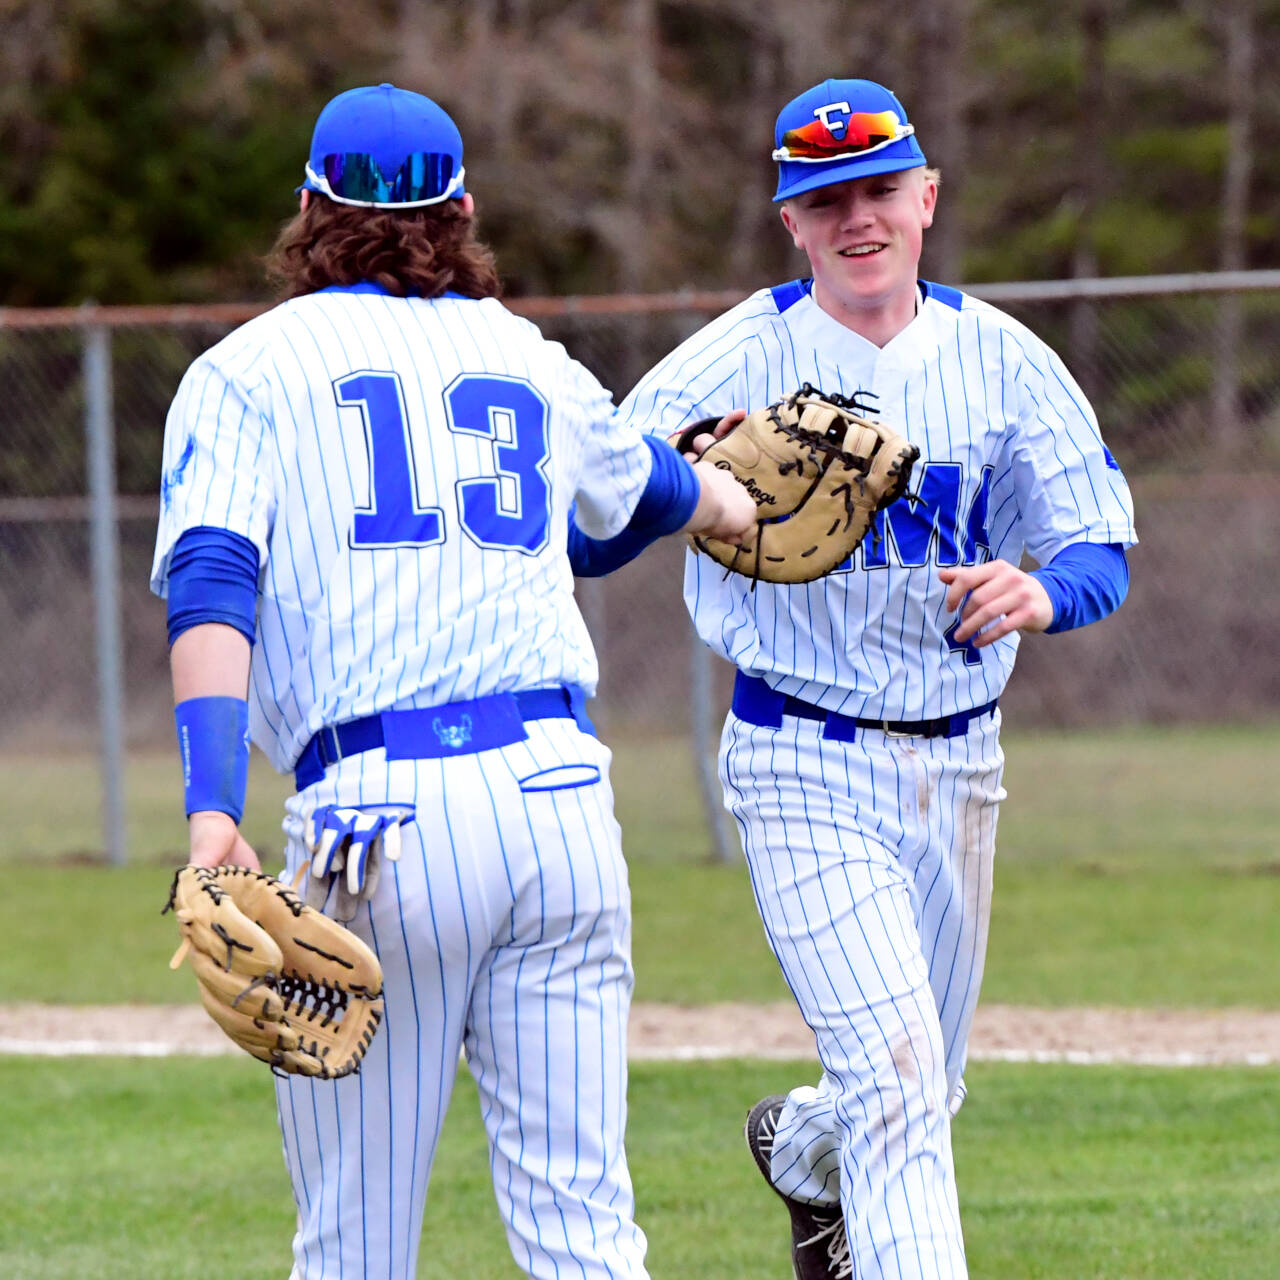 PHOTO BY CHRYSTAL WELD Elma’s Grant Vessey, right, and Gibson Cain high-five during the Eagles’ double header sweep over Hoquiam on Wednesday in Elma.